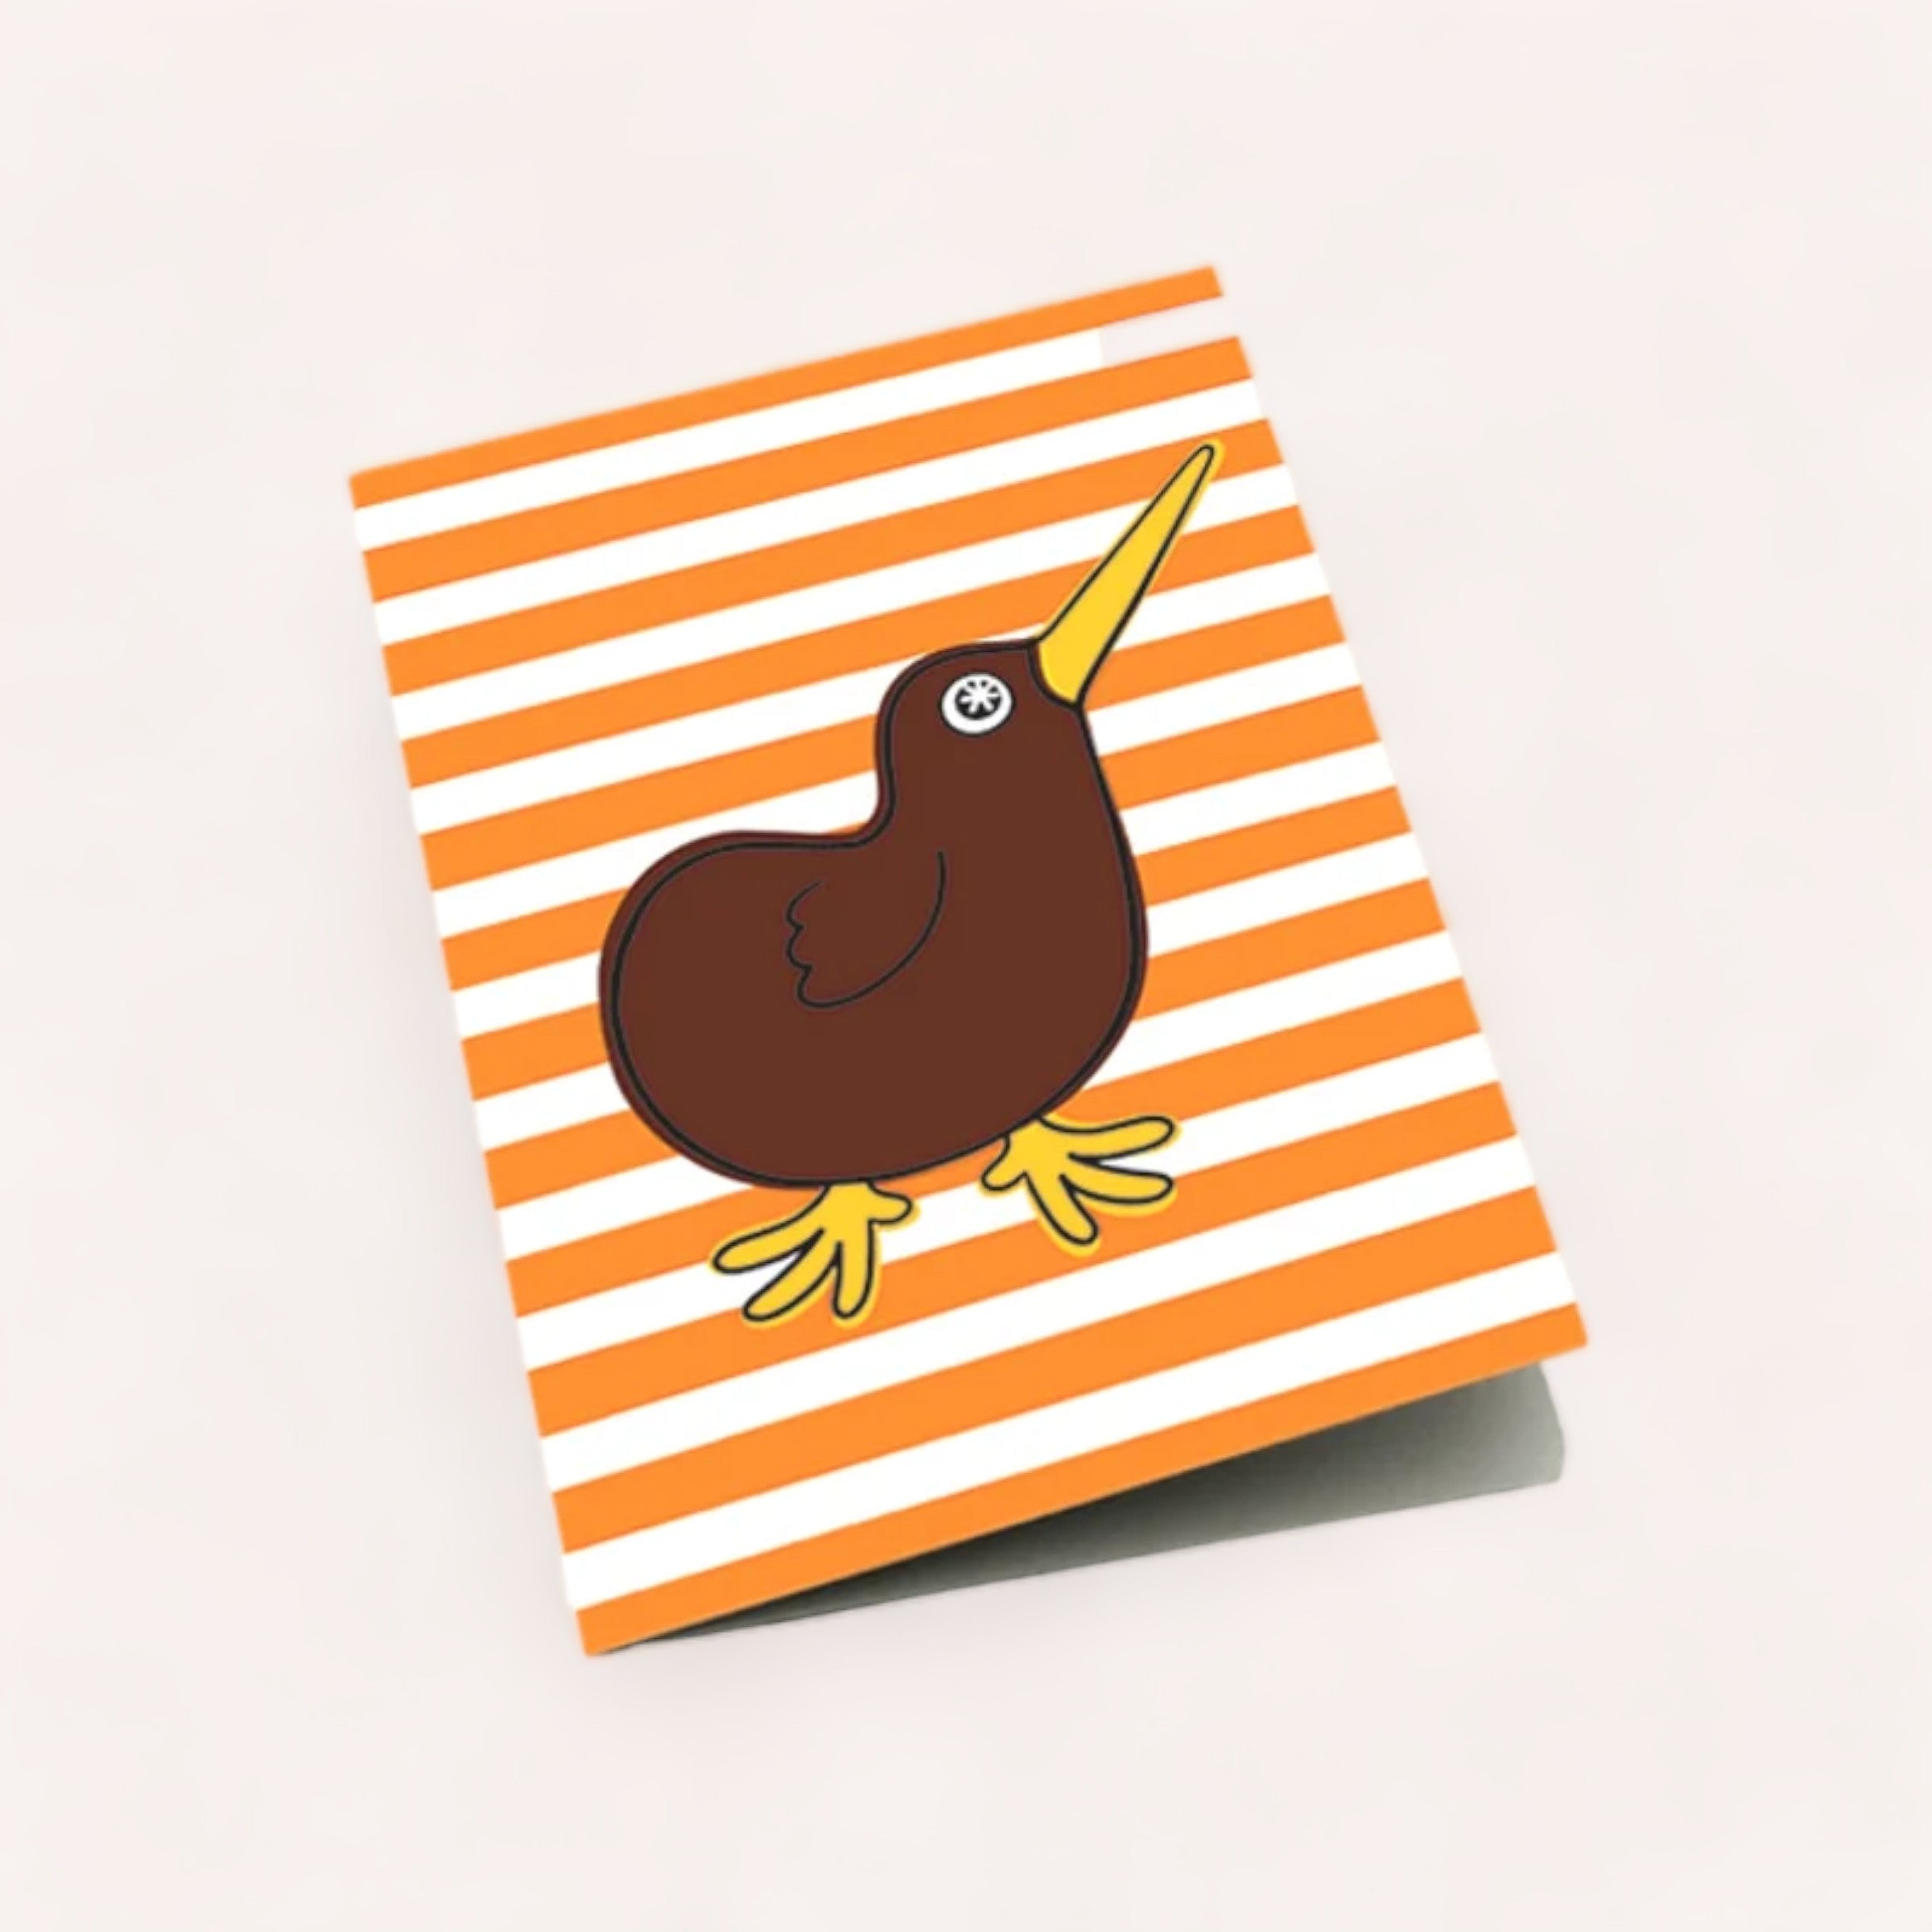 A whimsical sticker of a brown, cartoon-style bird with a long yellow beak and feet placed on a Kiwi Buddy Card by Design by Leonard lying on a light surface.